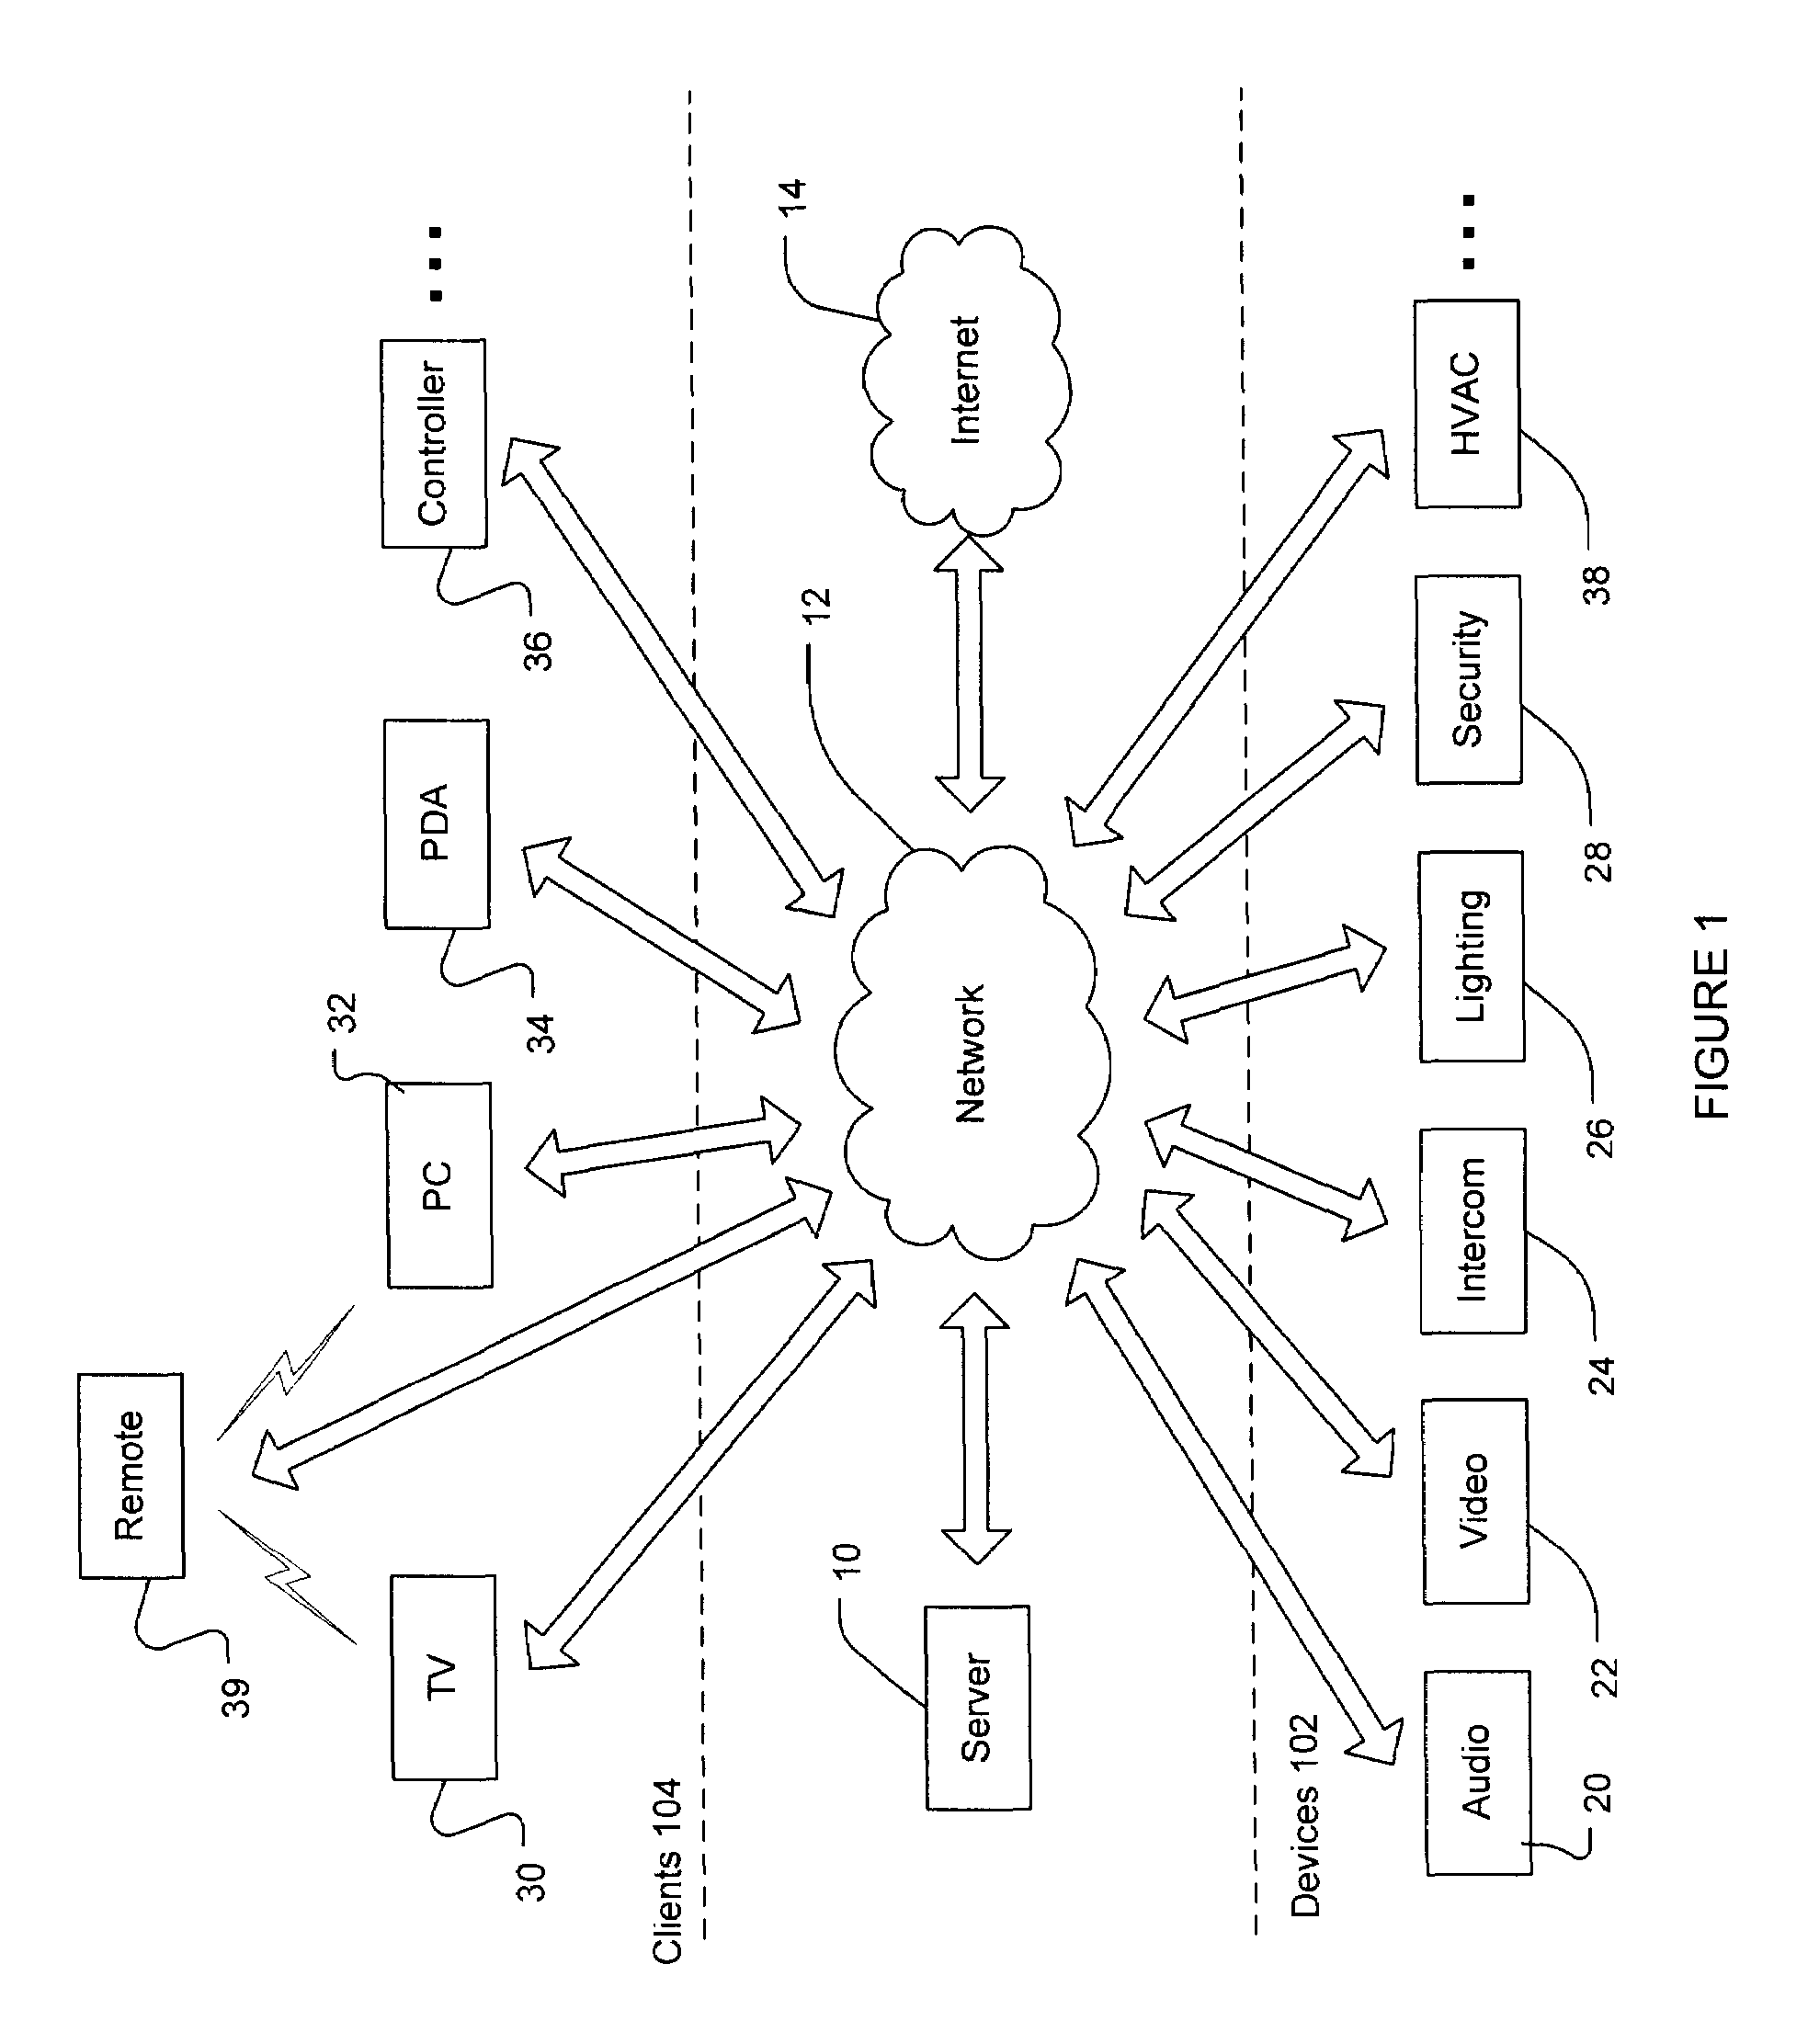 Device automation using networked device control having a web services for devices stack